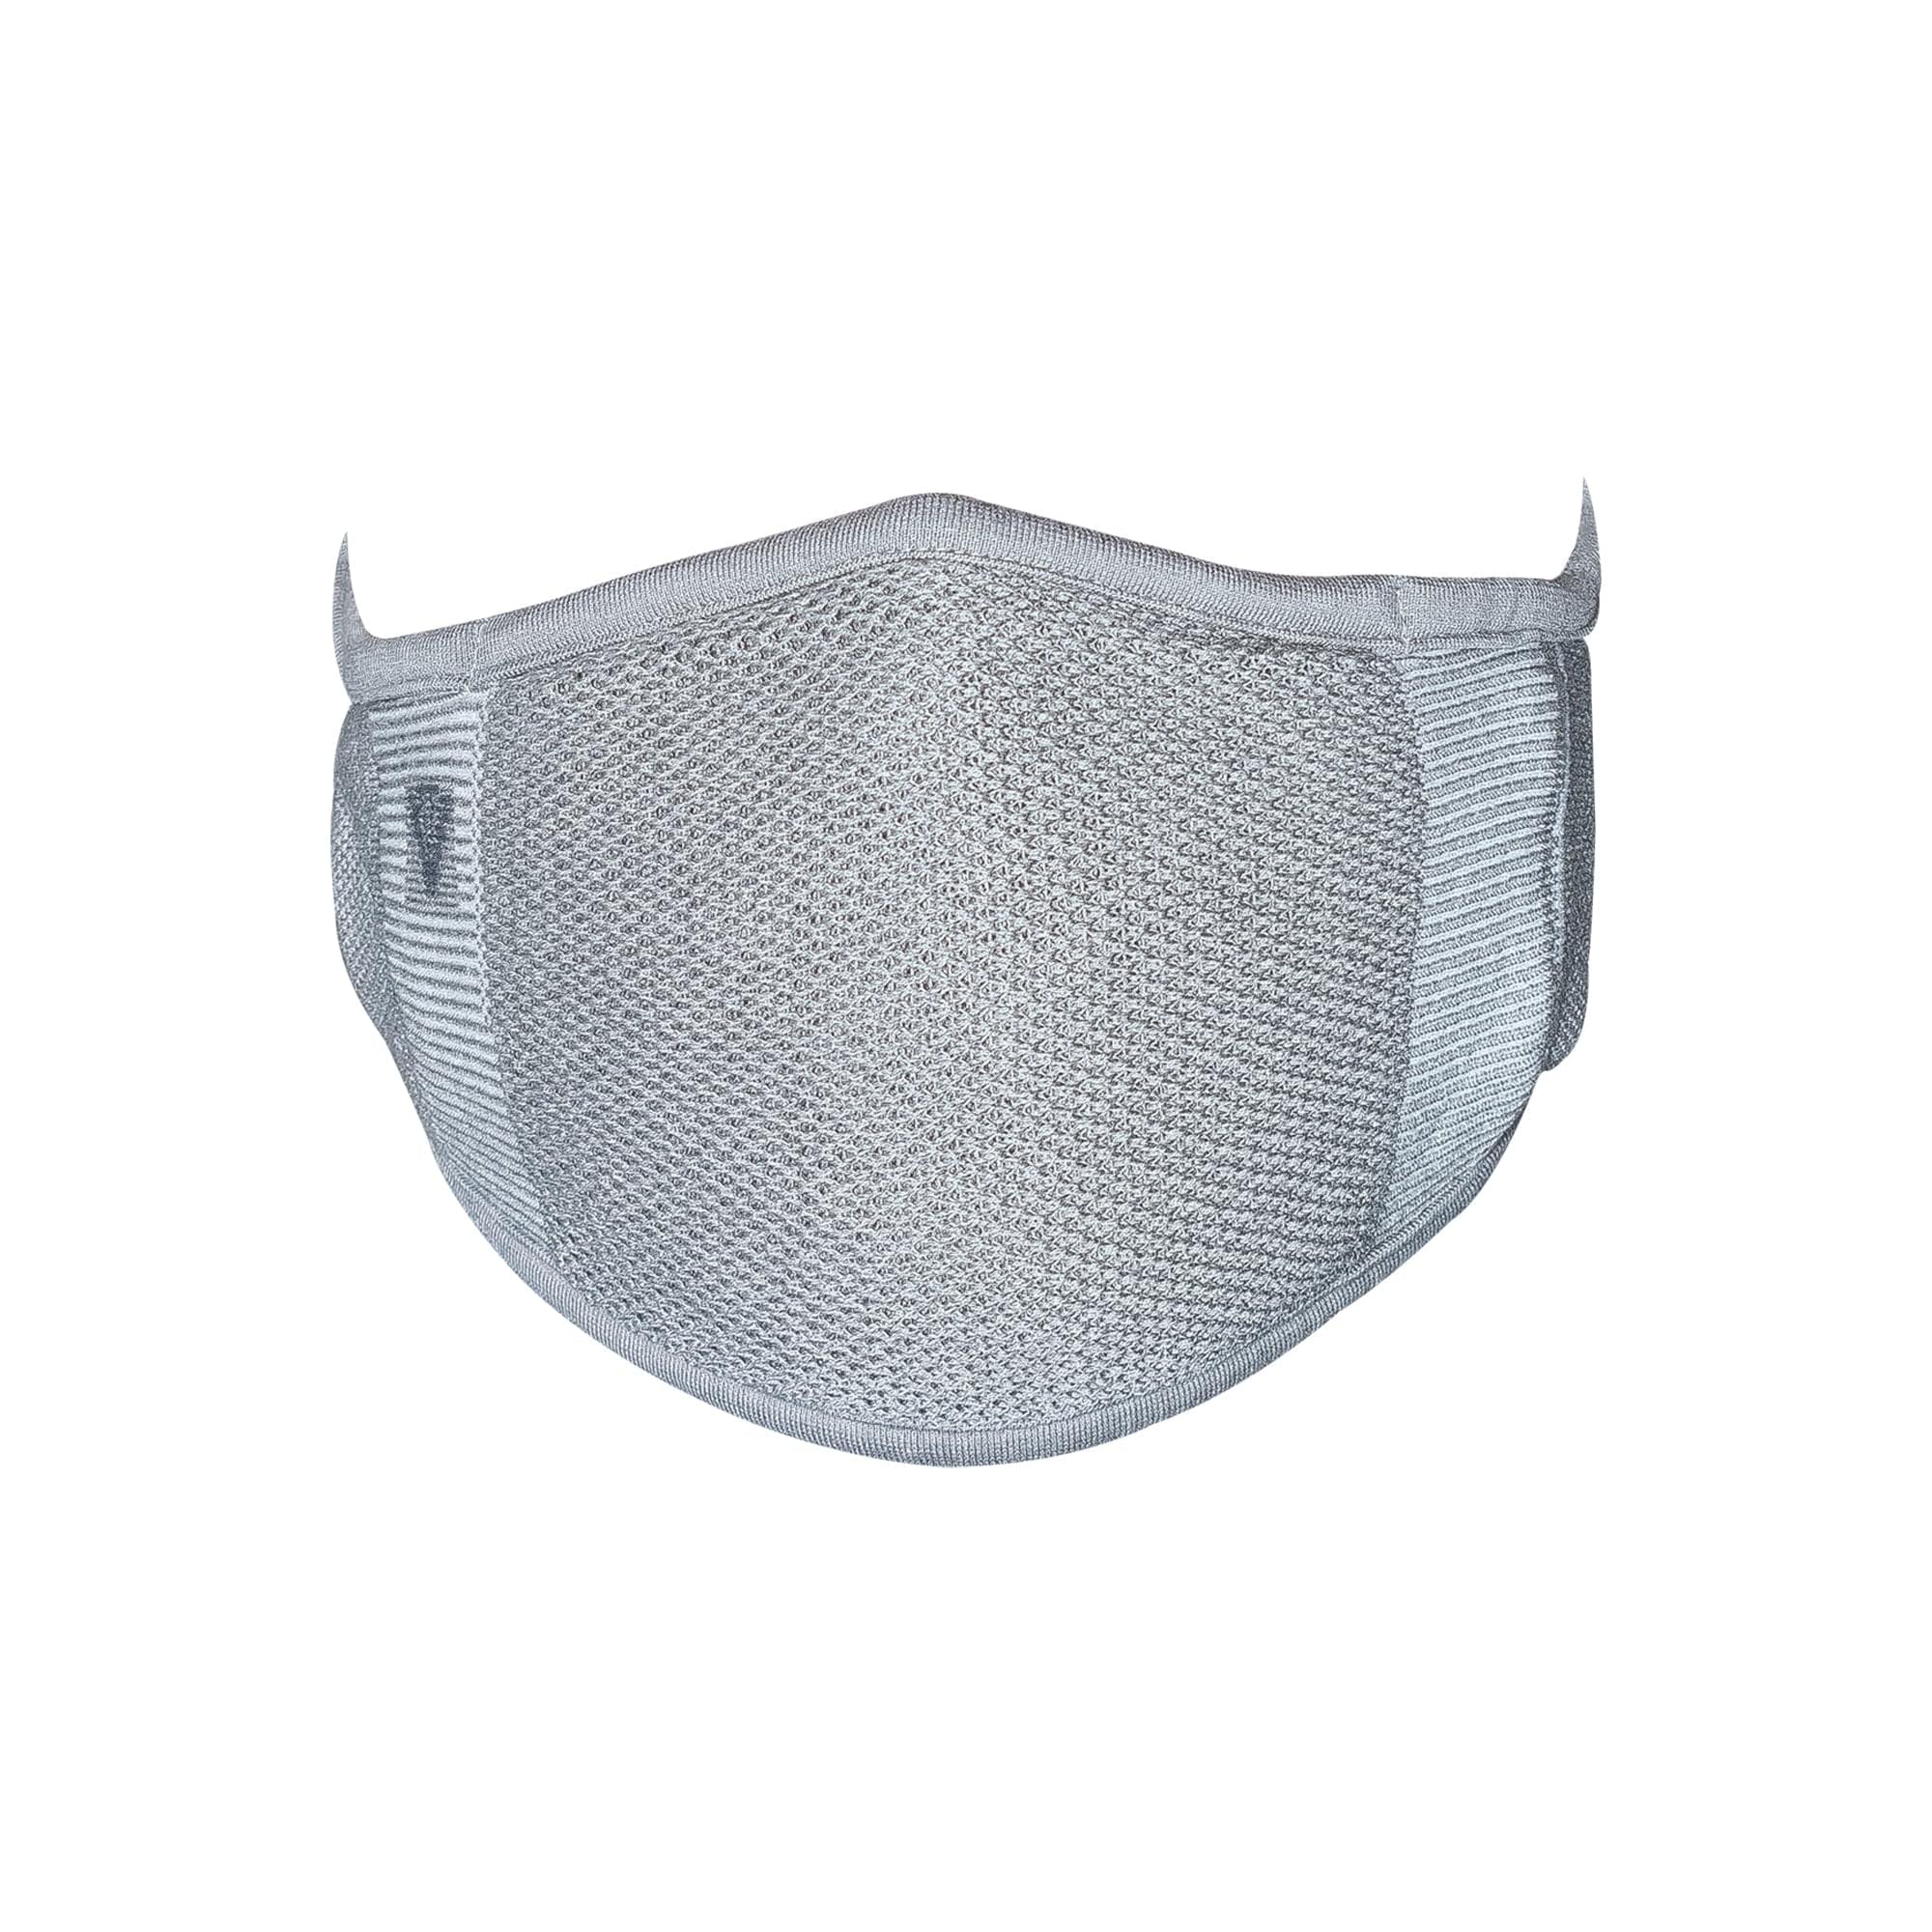 2-Layer Antibacterial Protection Mask for Adults (Unisex) - Pack of 1